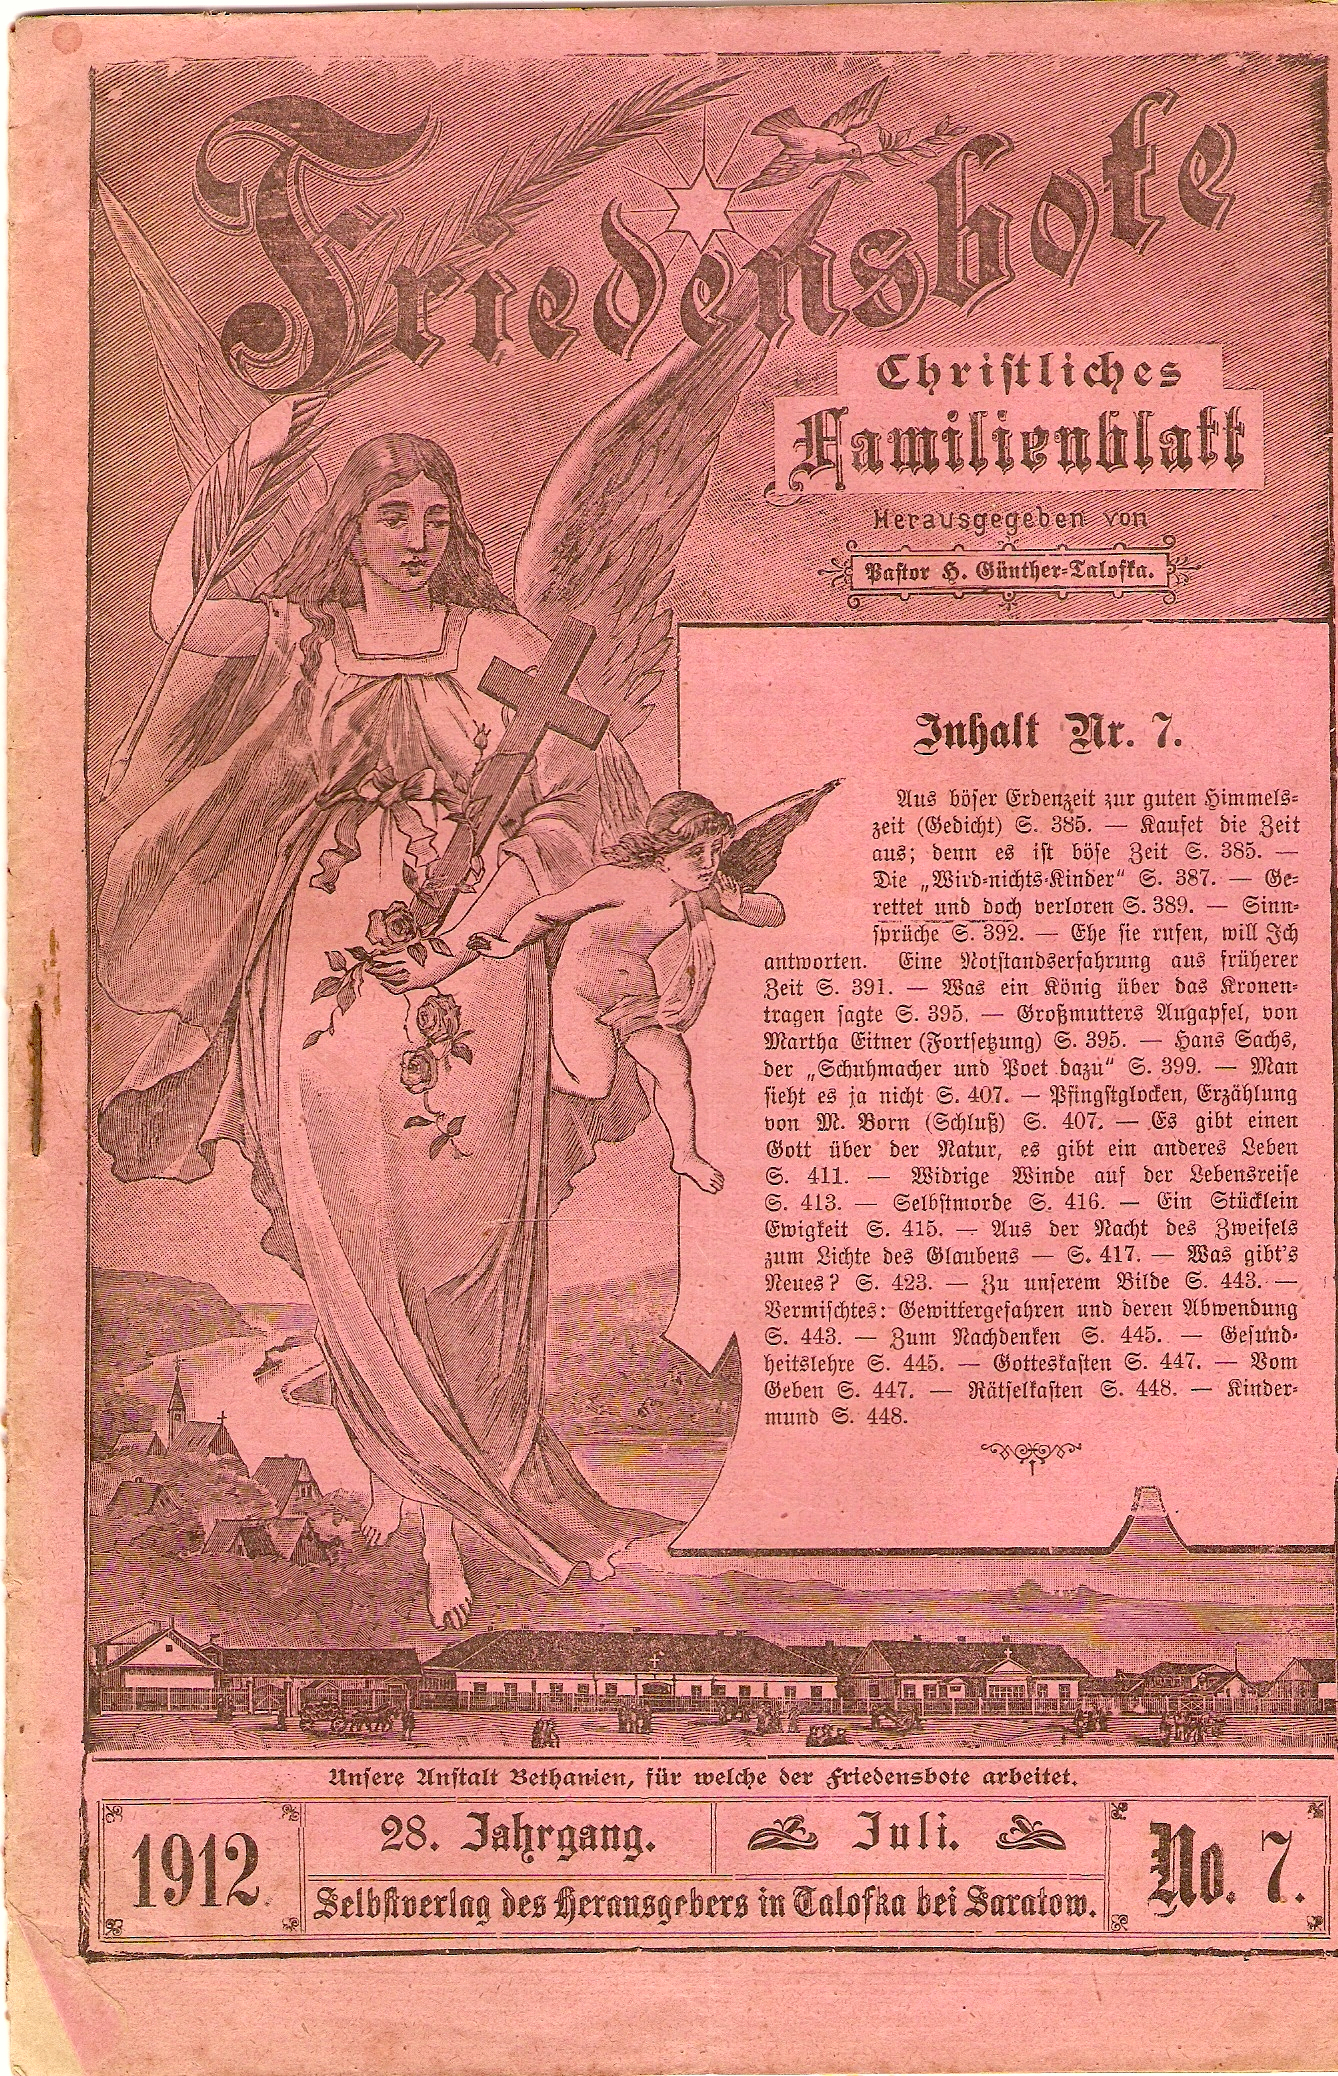 The Friedensbote: Monatsblatt für das Christliche Haus, was a monthly magazine published in the colony of Beideck from 1884 to 1915. This issue was published by Pastor Günther from Beideck (Talowka).